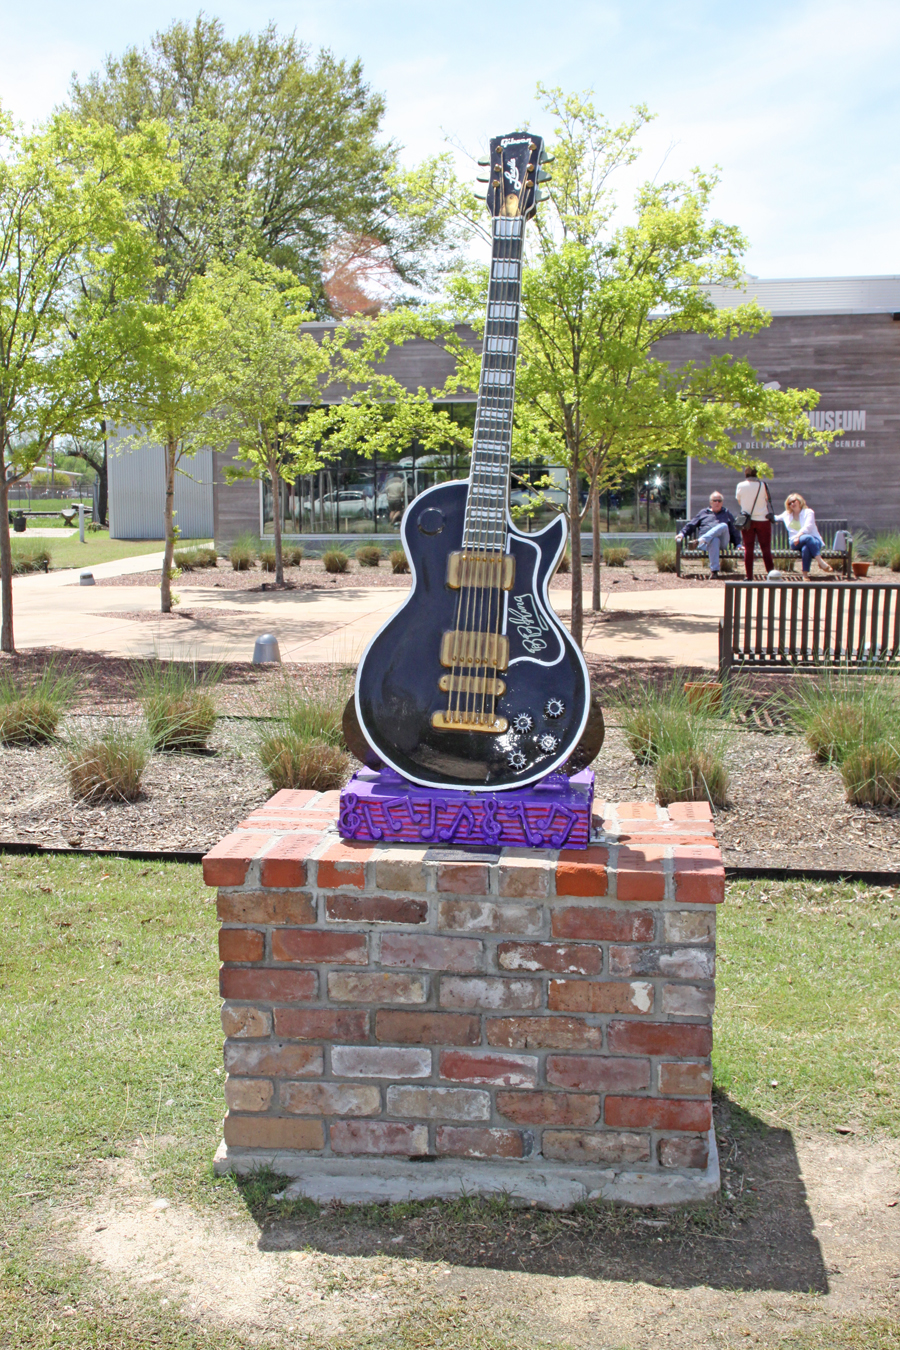 Stature of "Lucille" in front of the B. B. King Museum in Indianola, Mississippi